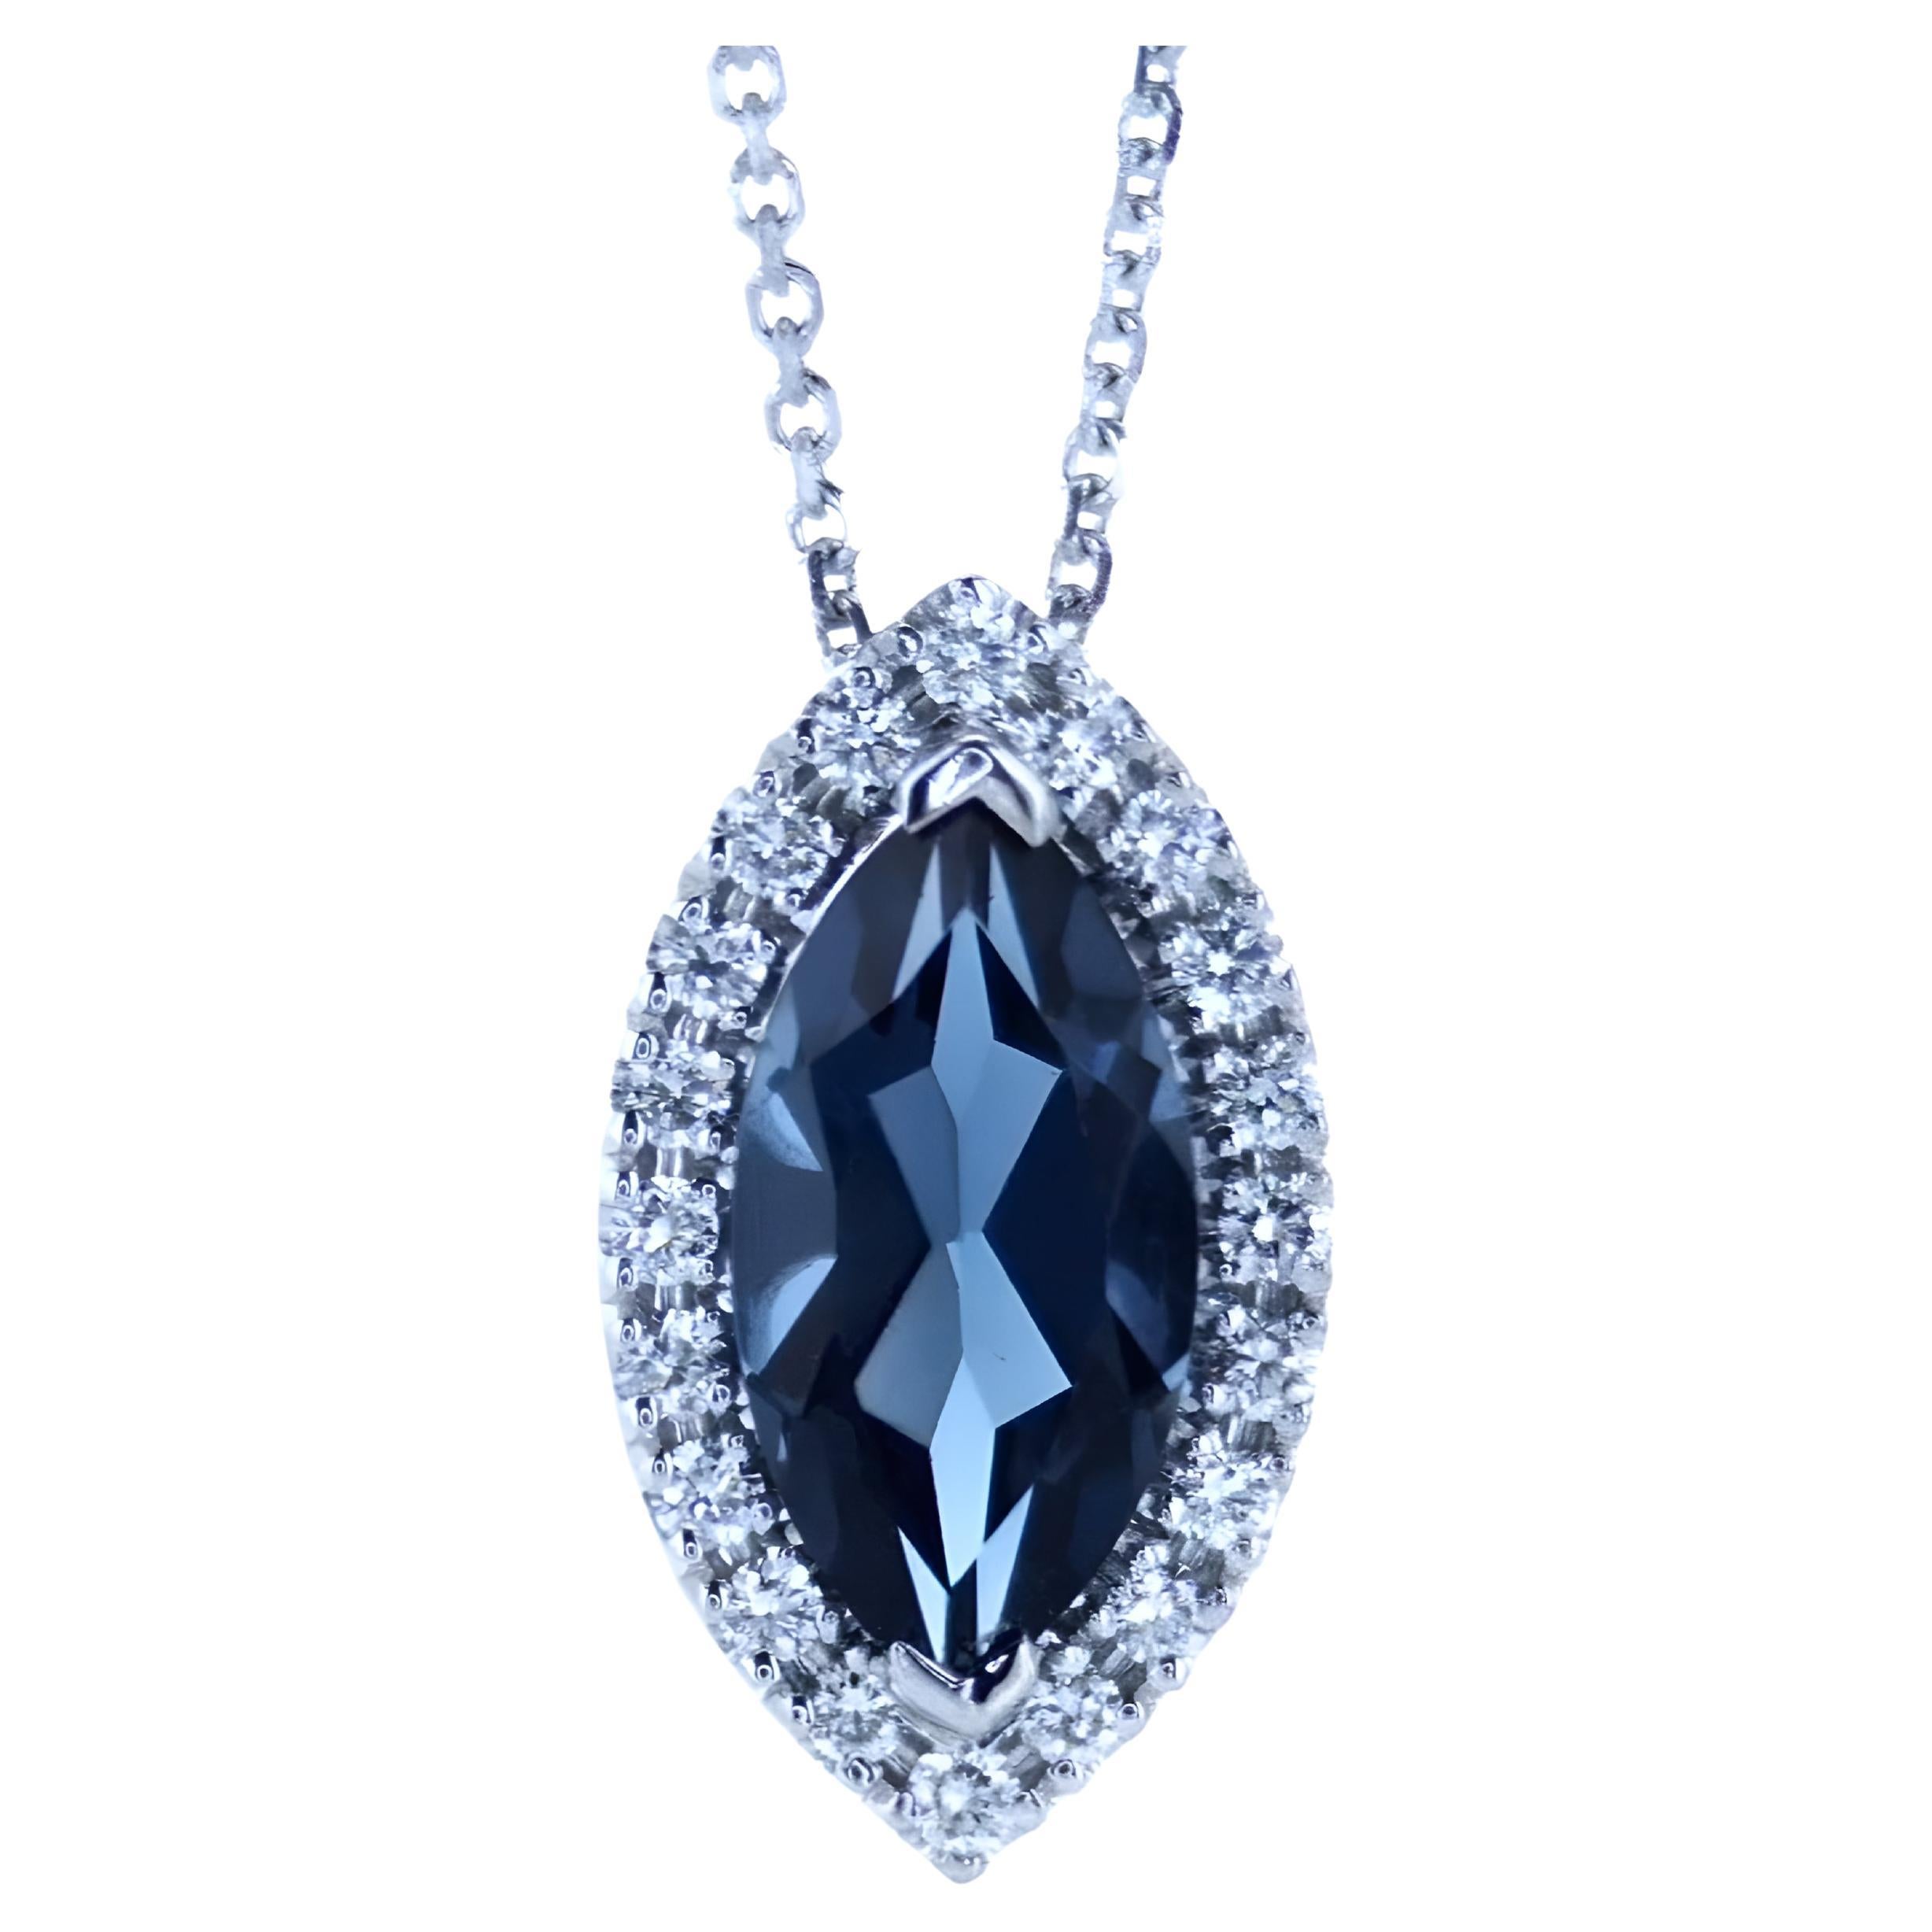 "London" Blue Topaz and Diamonds Necklace For Sale